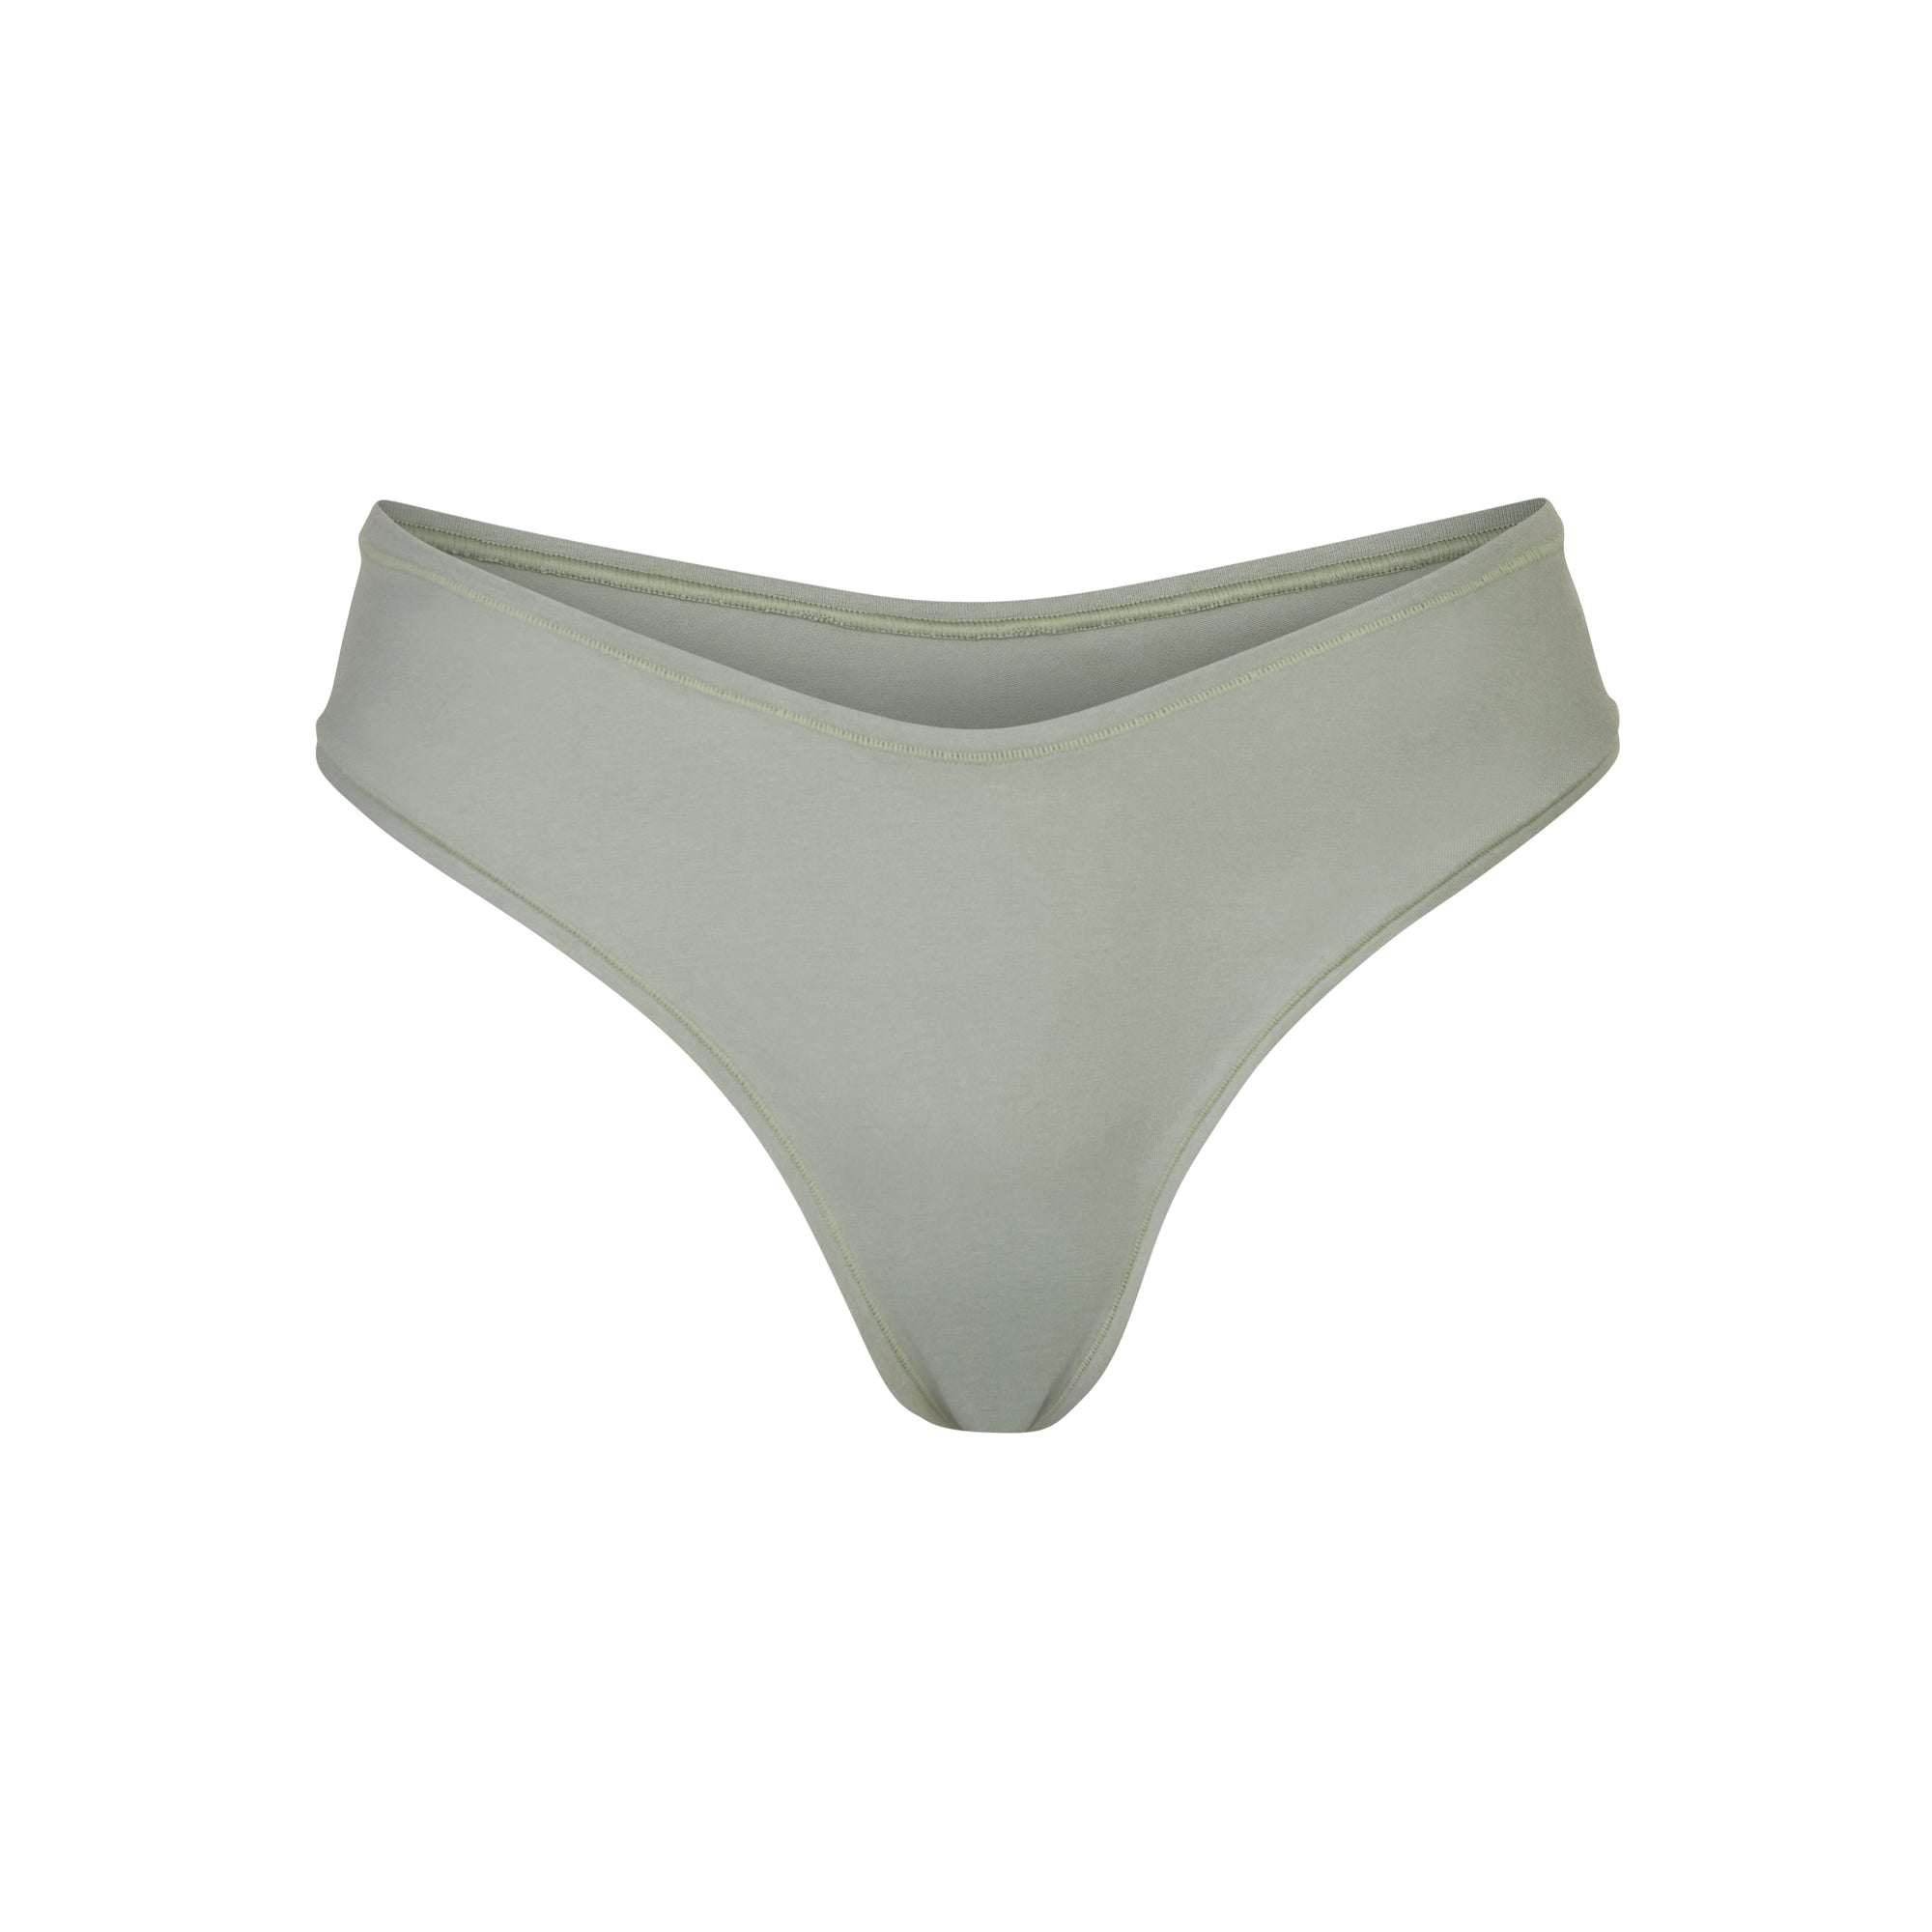 SKIMS Cotton Jersey Dipped Thong - ShopStyle